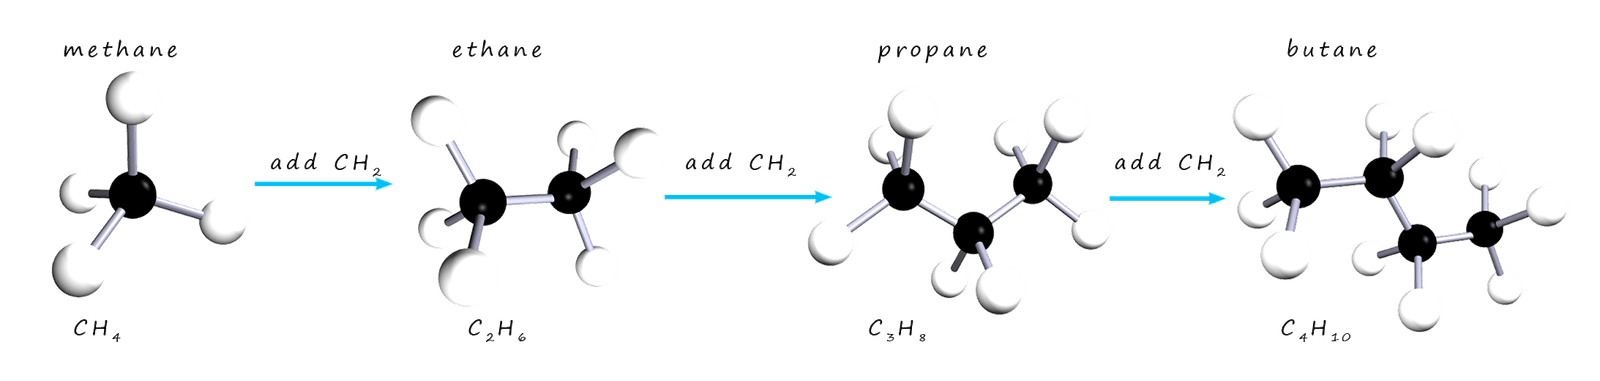 3d models to show the first four alkanes along with their molecular formula.